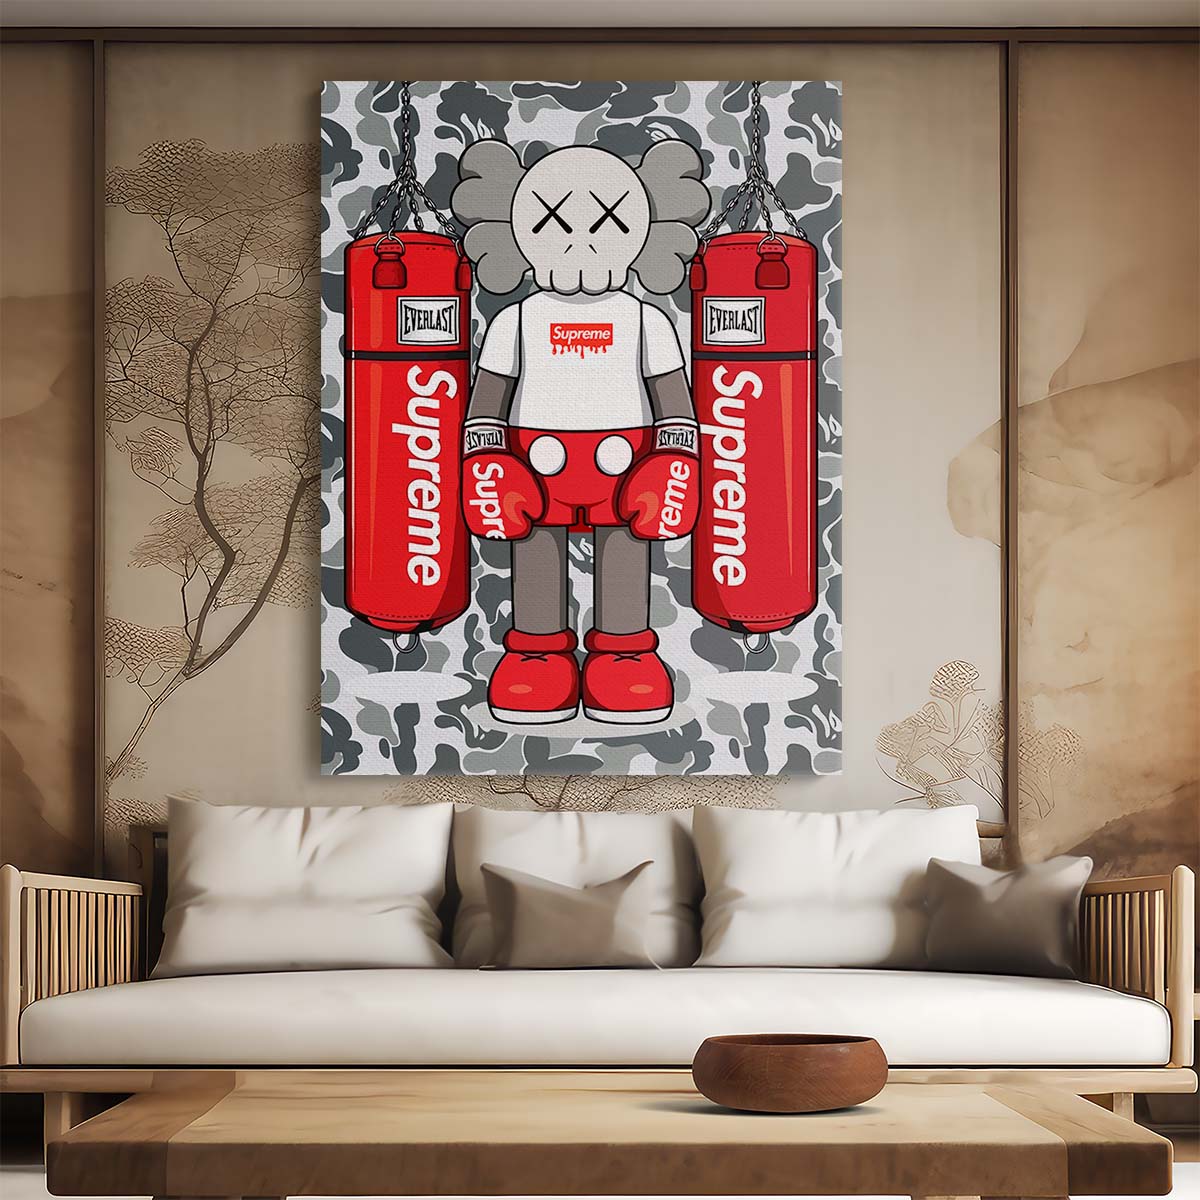 Supreme Kaws Fighter Everlast Wall Art by Luxuriance Designs. Made in USA.